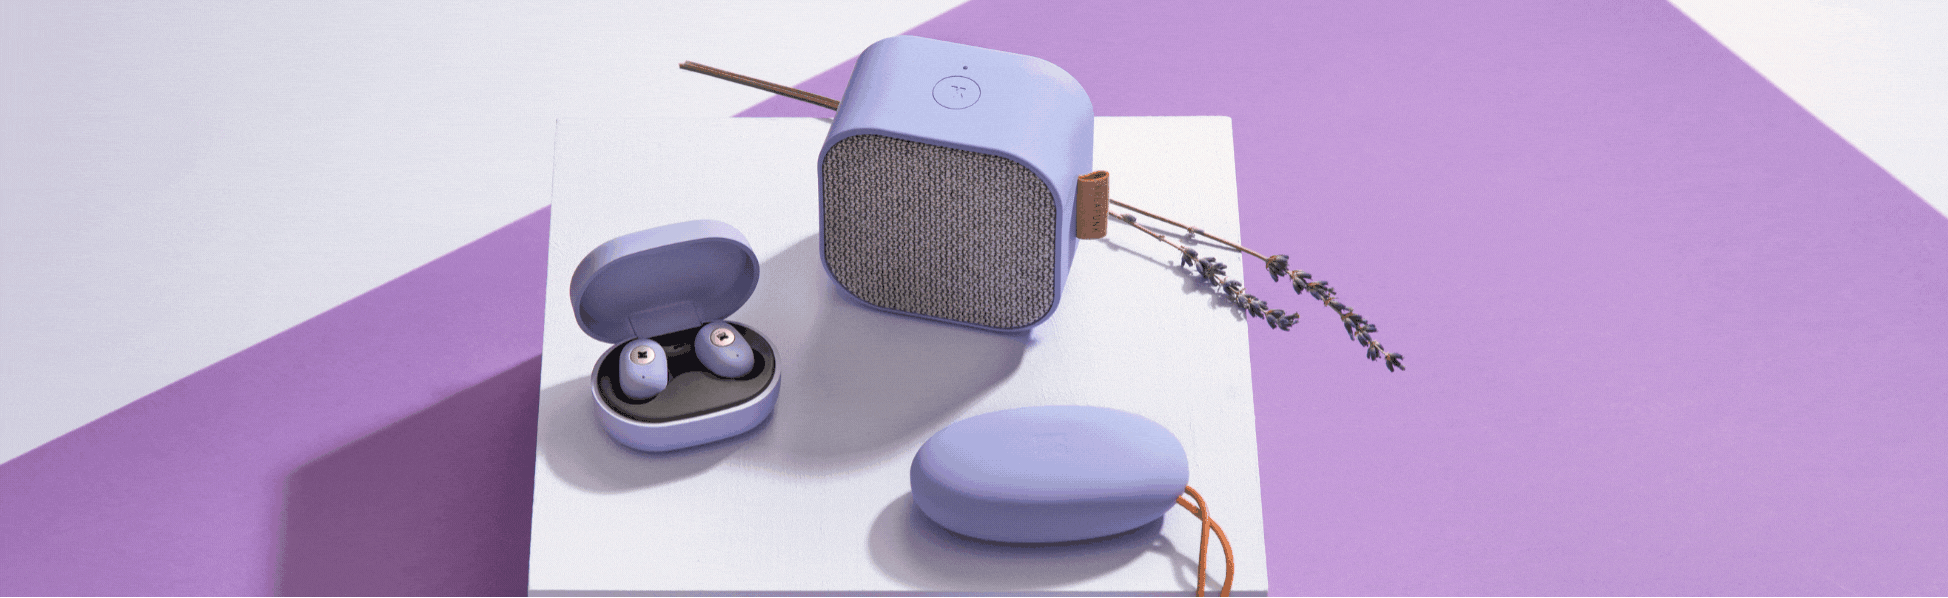 Promotional shot showing the lavender in-ear headphones, speaker and case